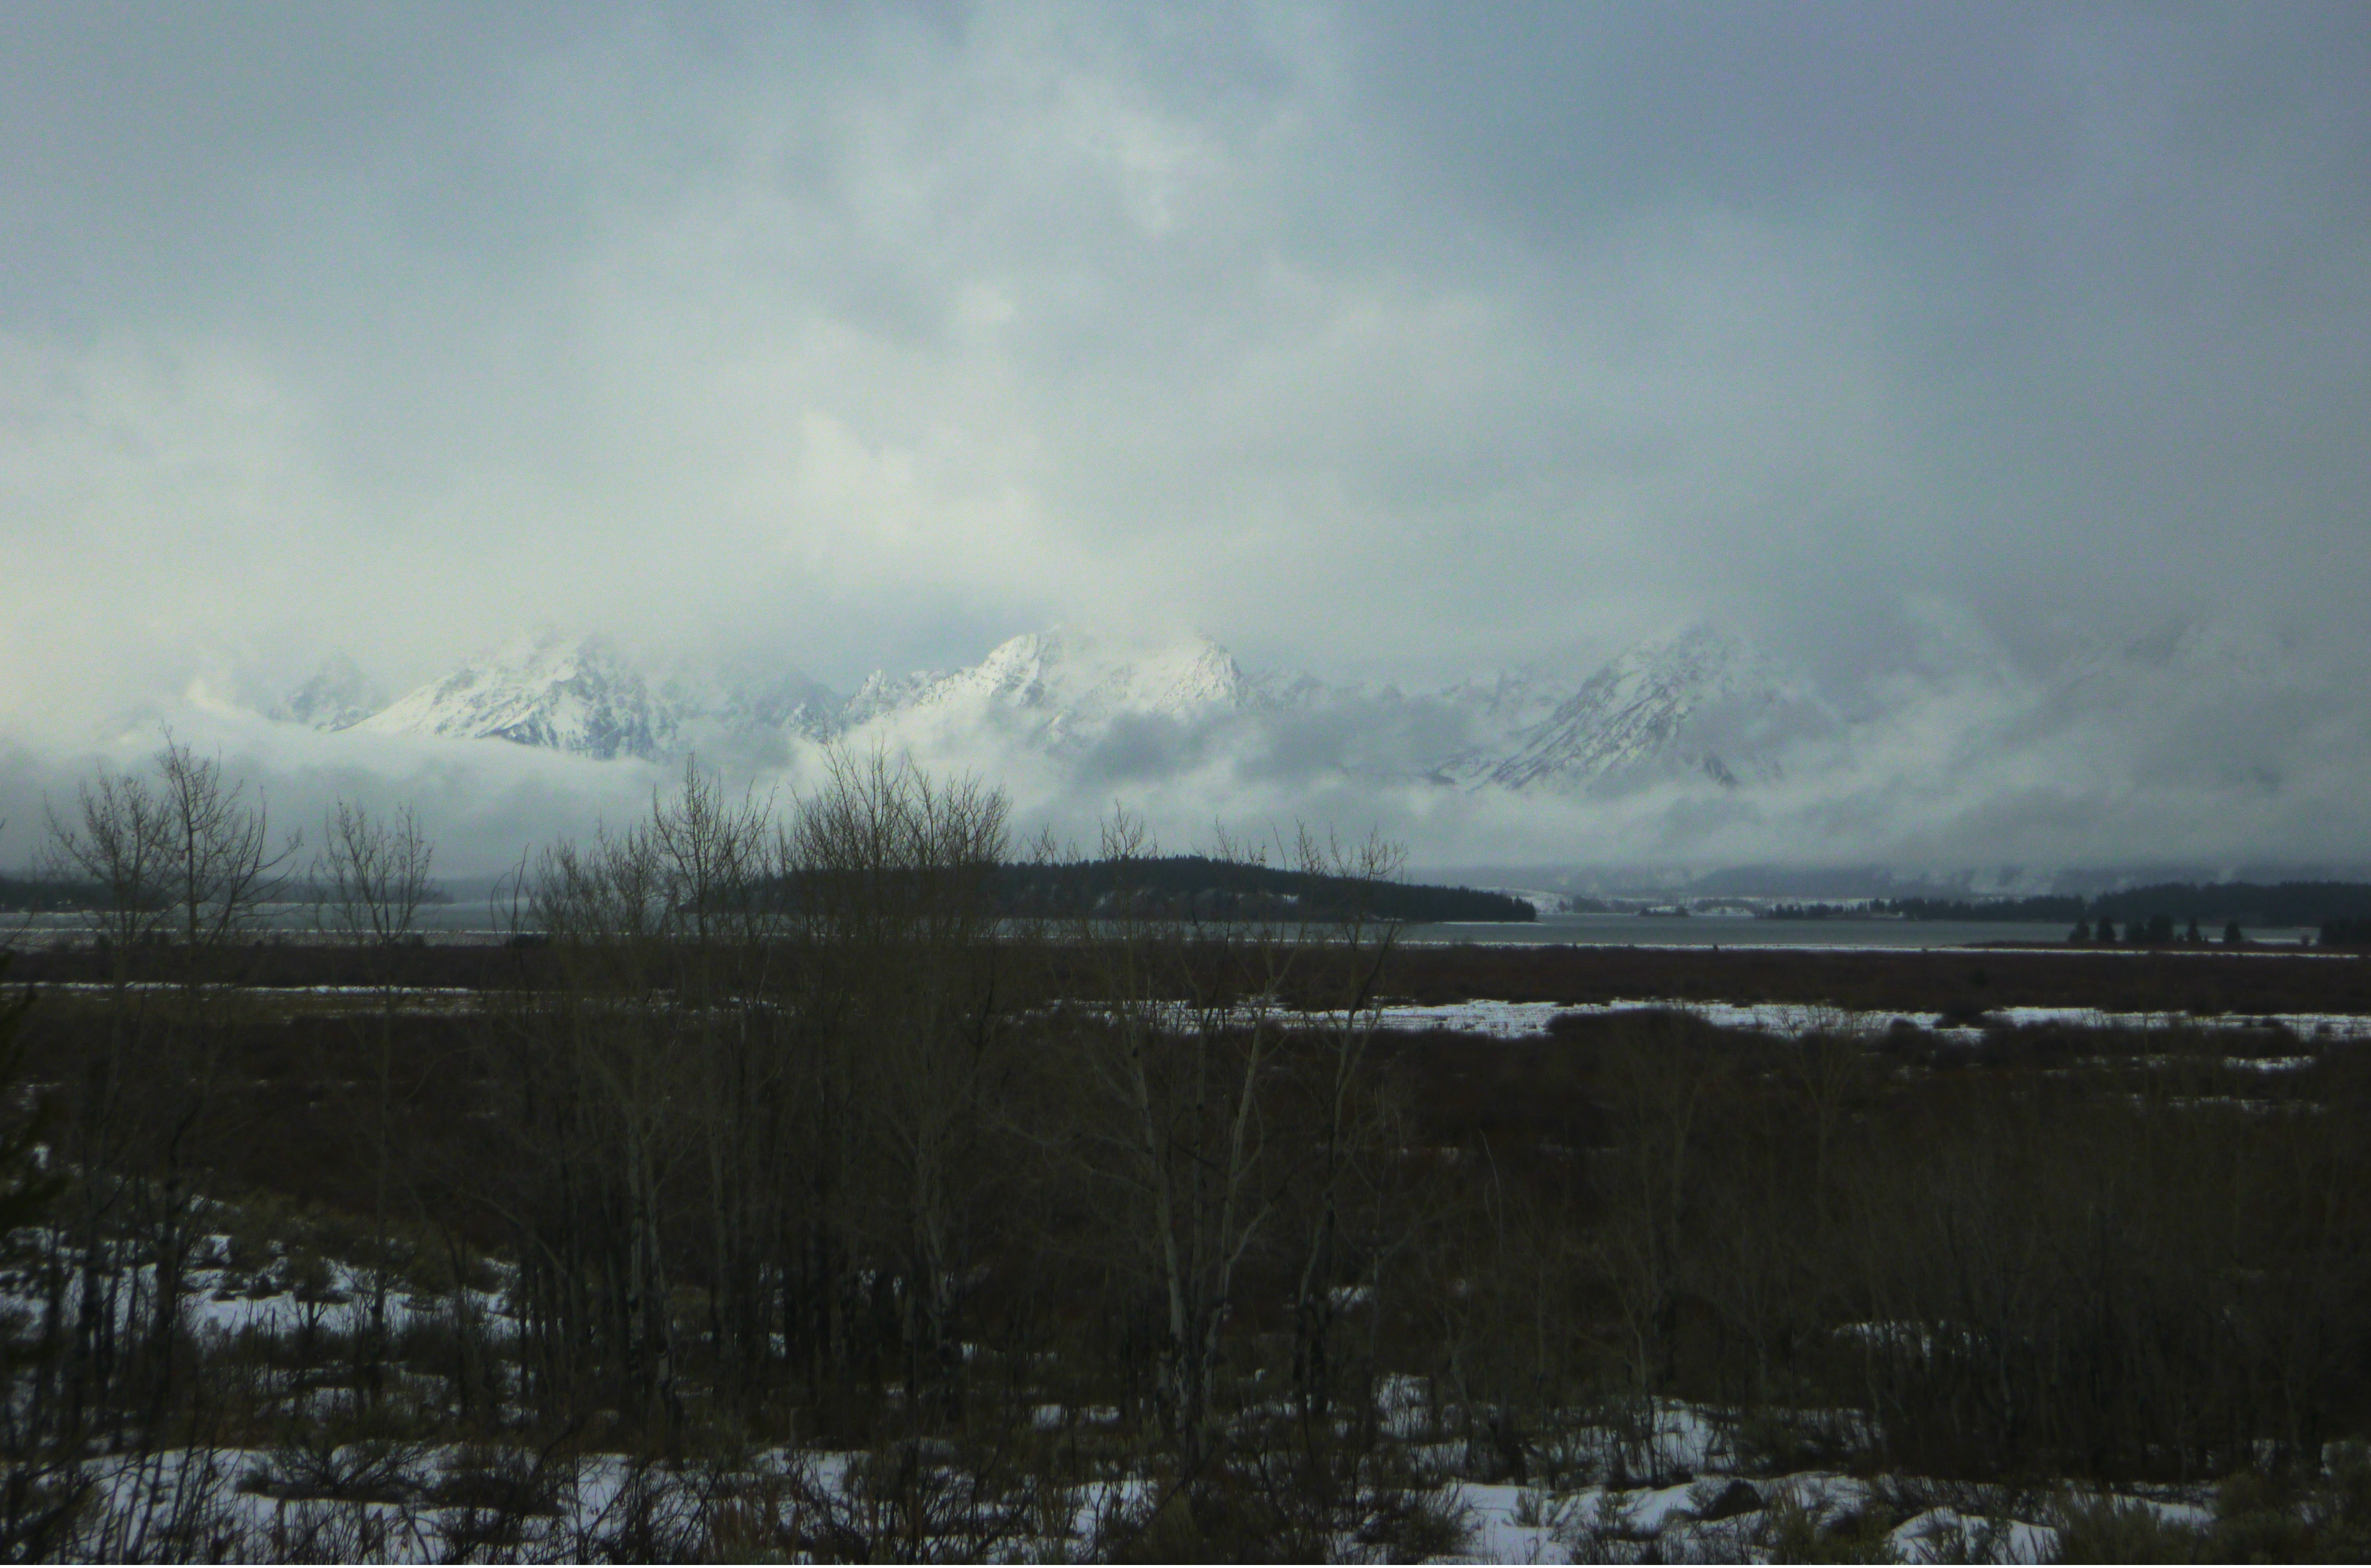 Grand Tetons in cloud cover